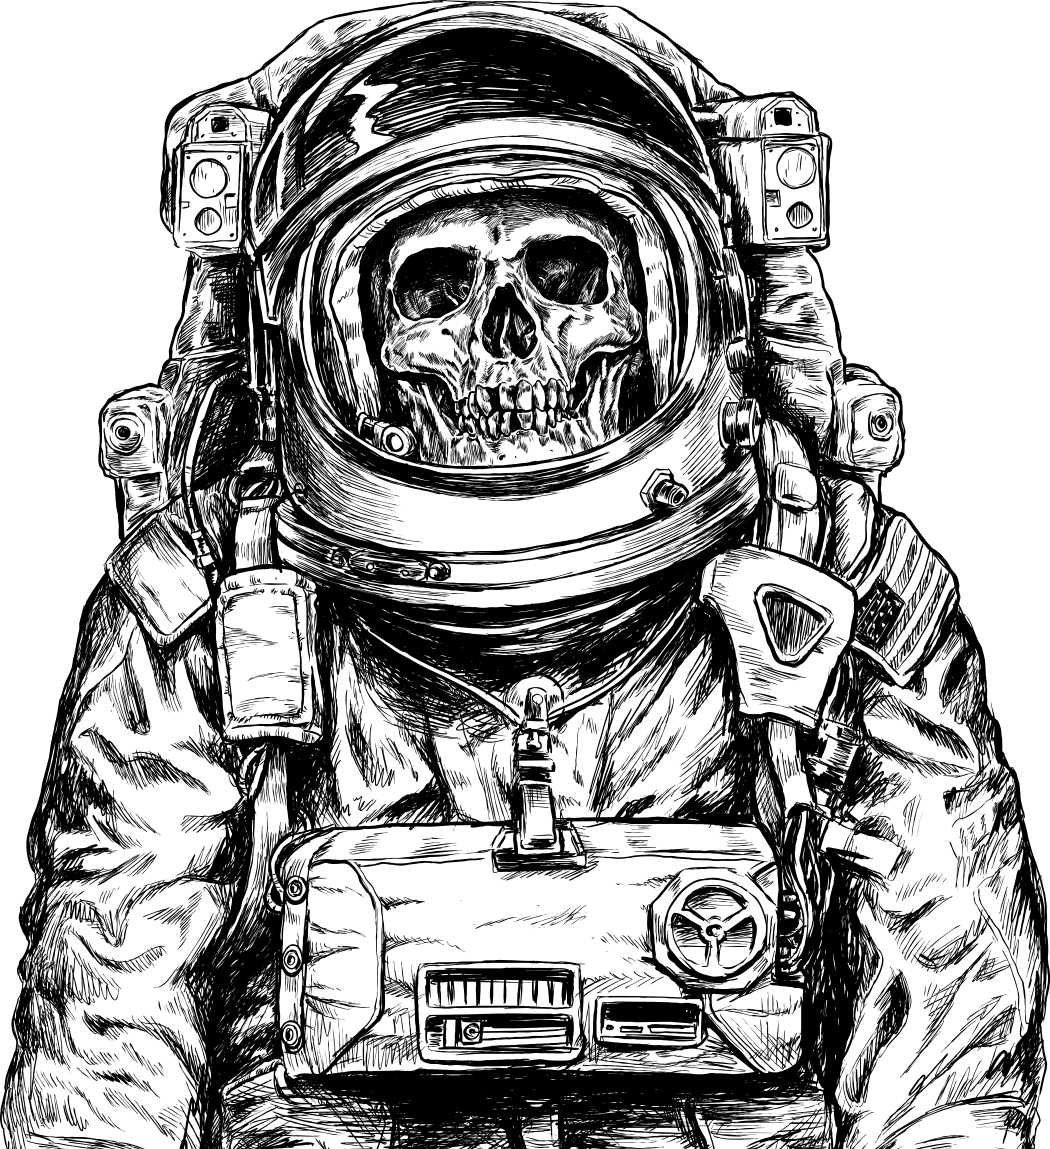 Black and white illustration of a dead astronaut, now only dry bones inside his suit and helmet.